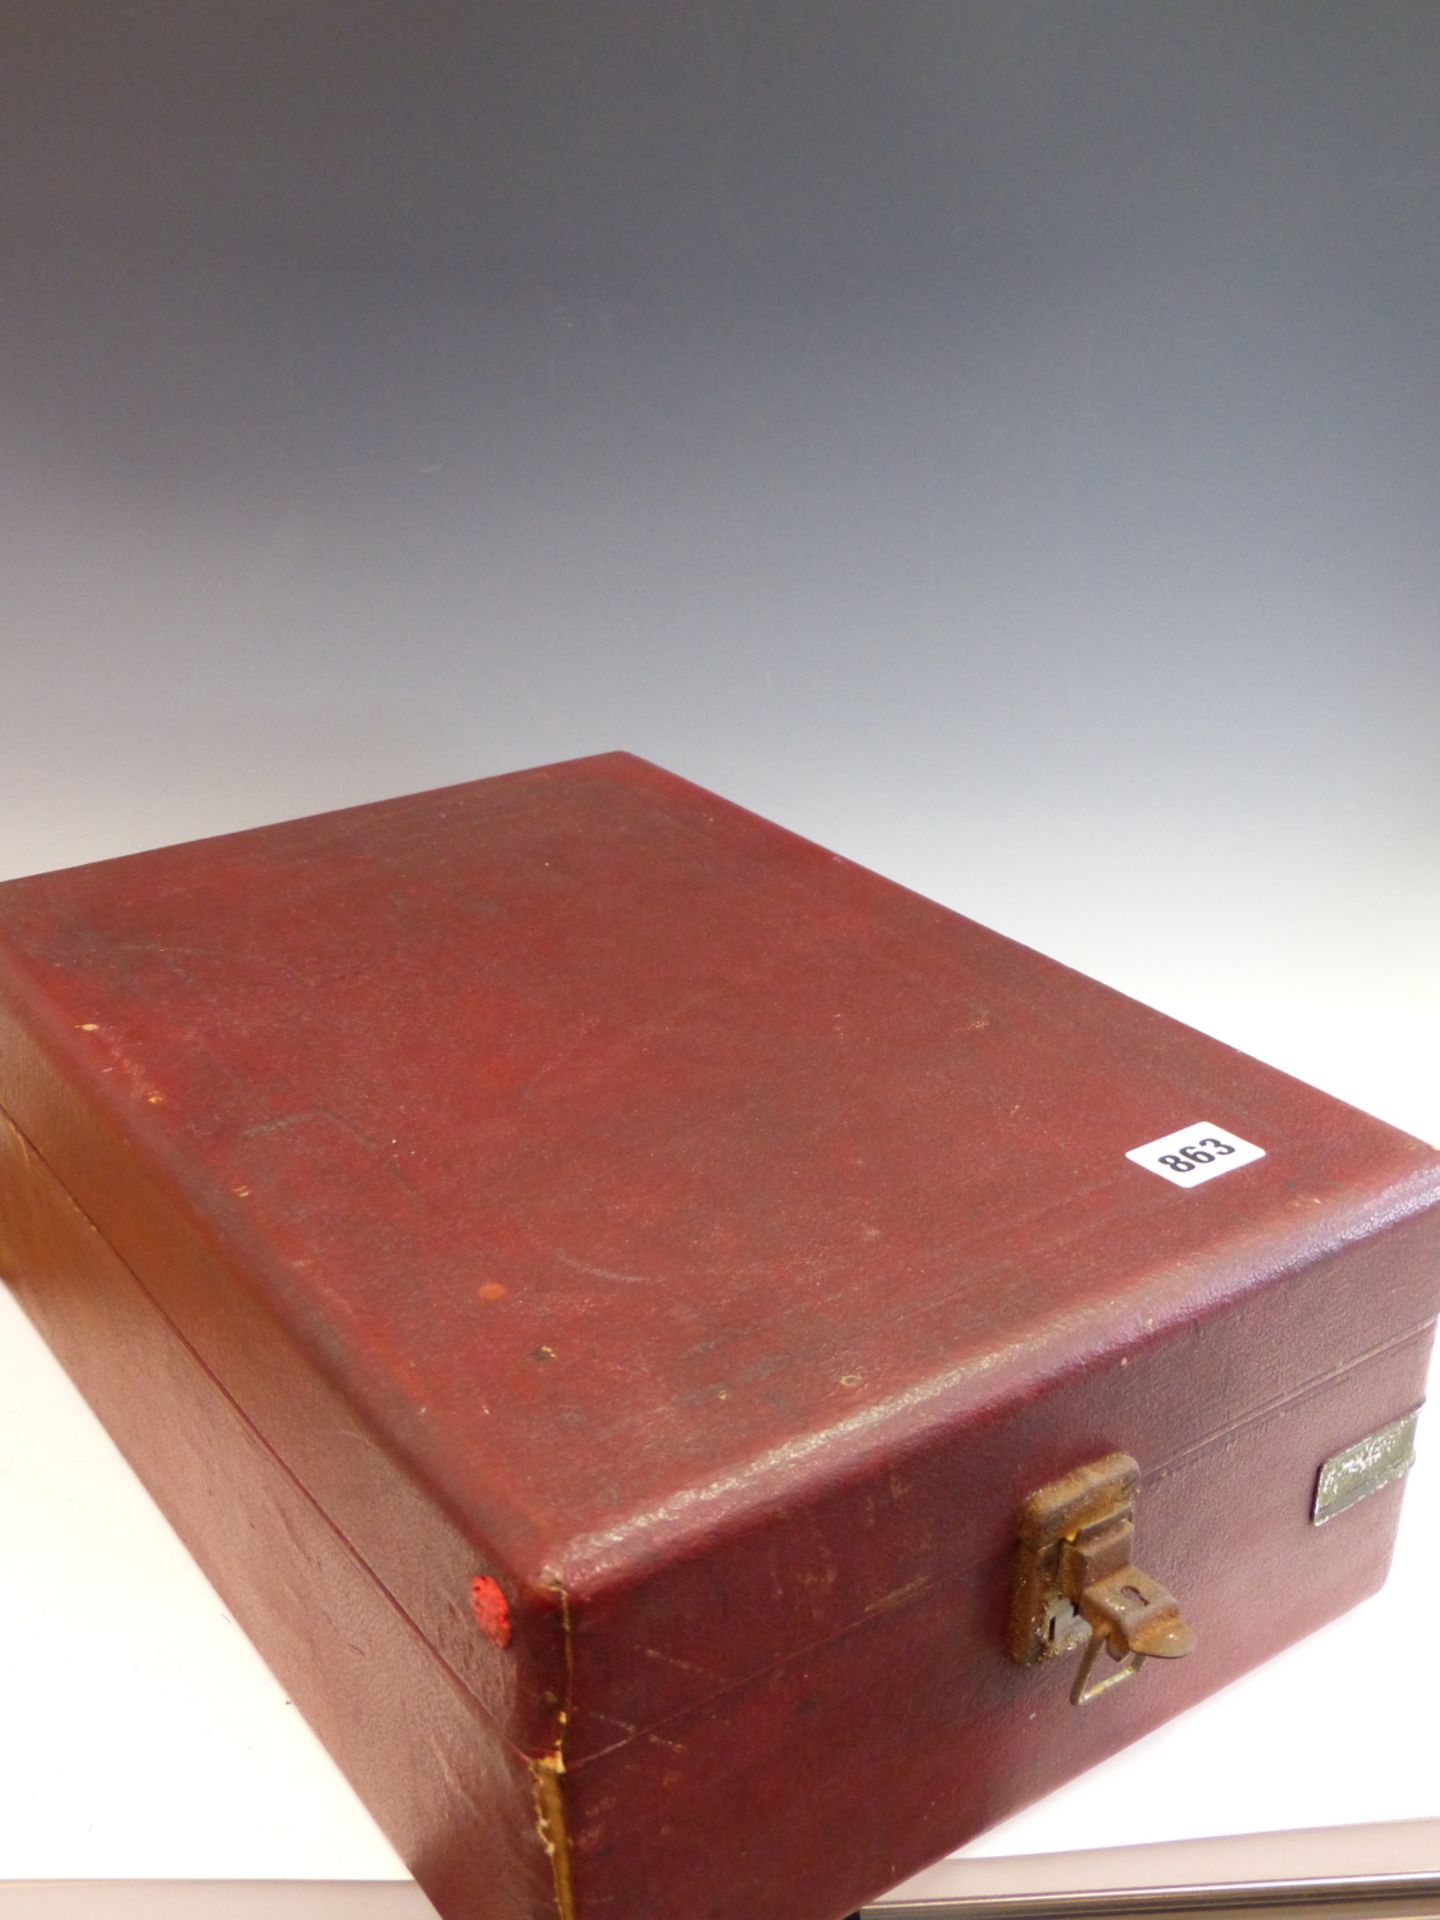 A VINTAGE HMV (HIS MASTERS VOICE) PORTABLE GRAMOPHONE IN RARE RED LETHERETTE COVERED OUTER. - Image 5 of 6